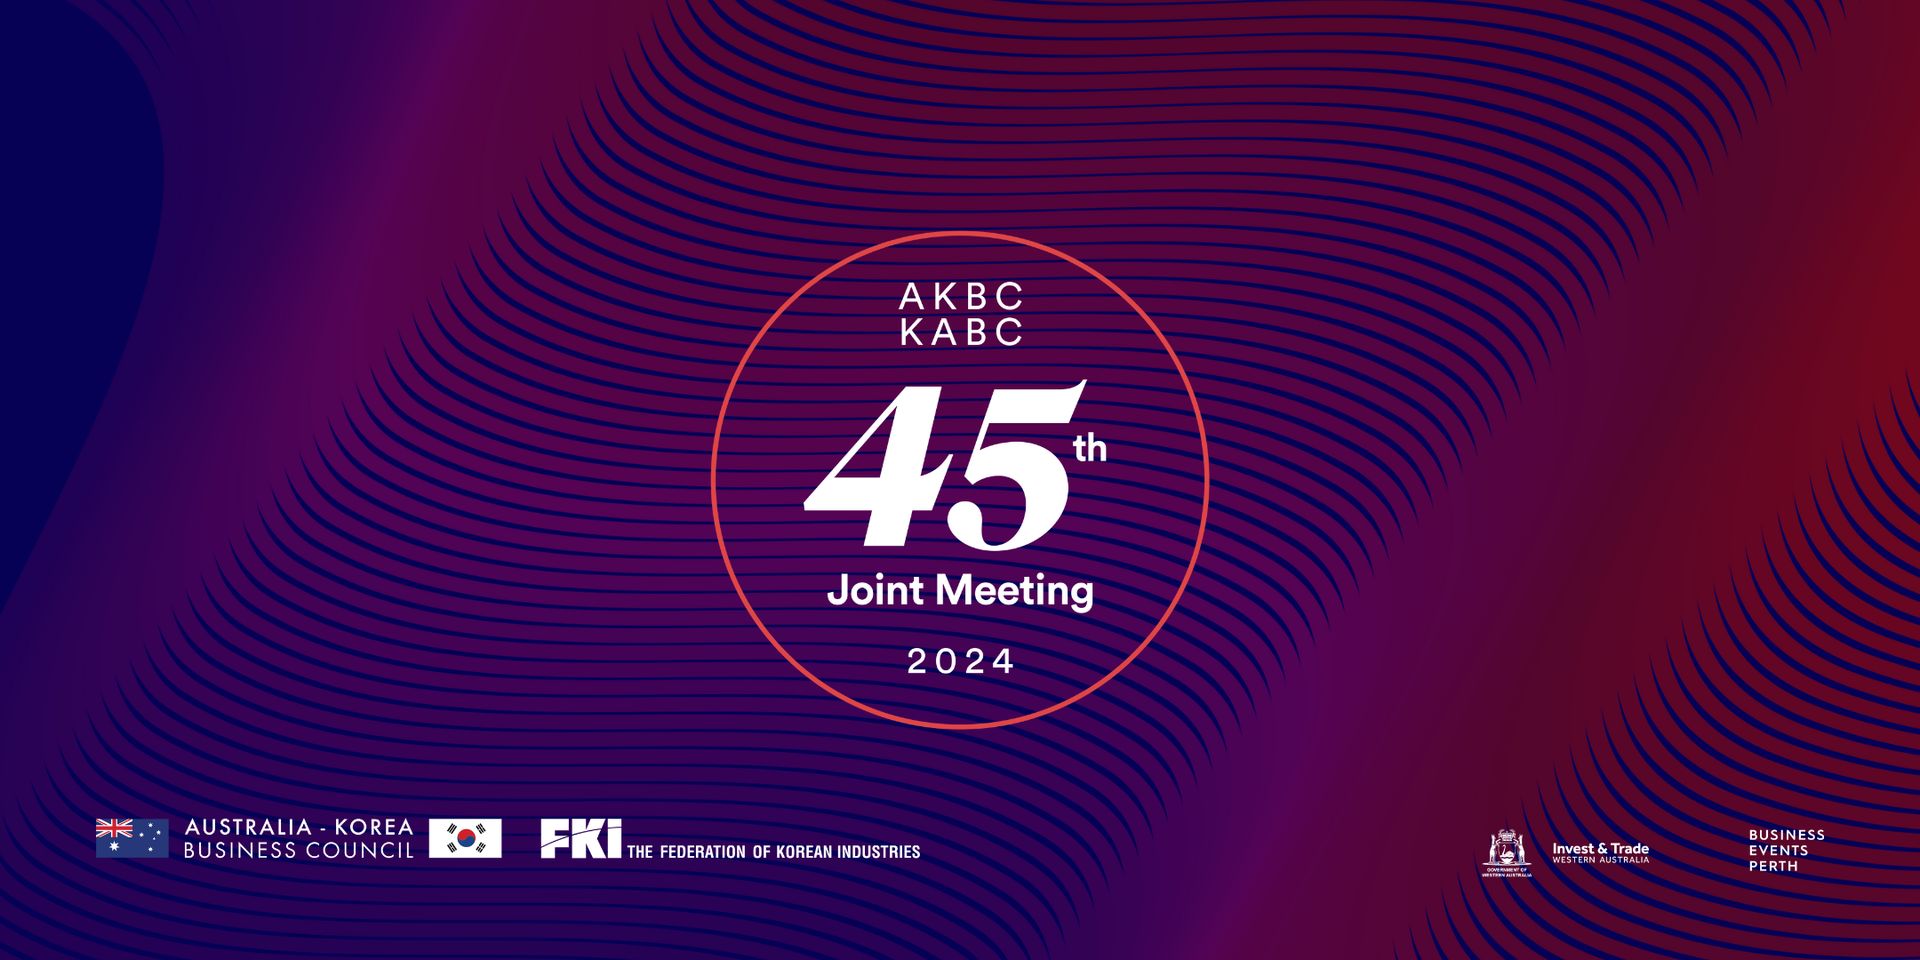 thumbnails The 45th AKBC-KABC Joint Meeting